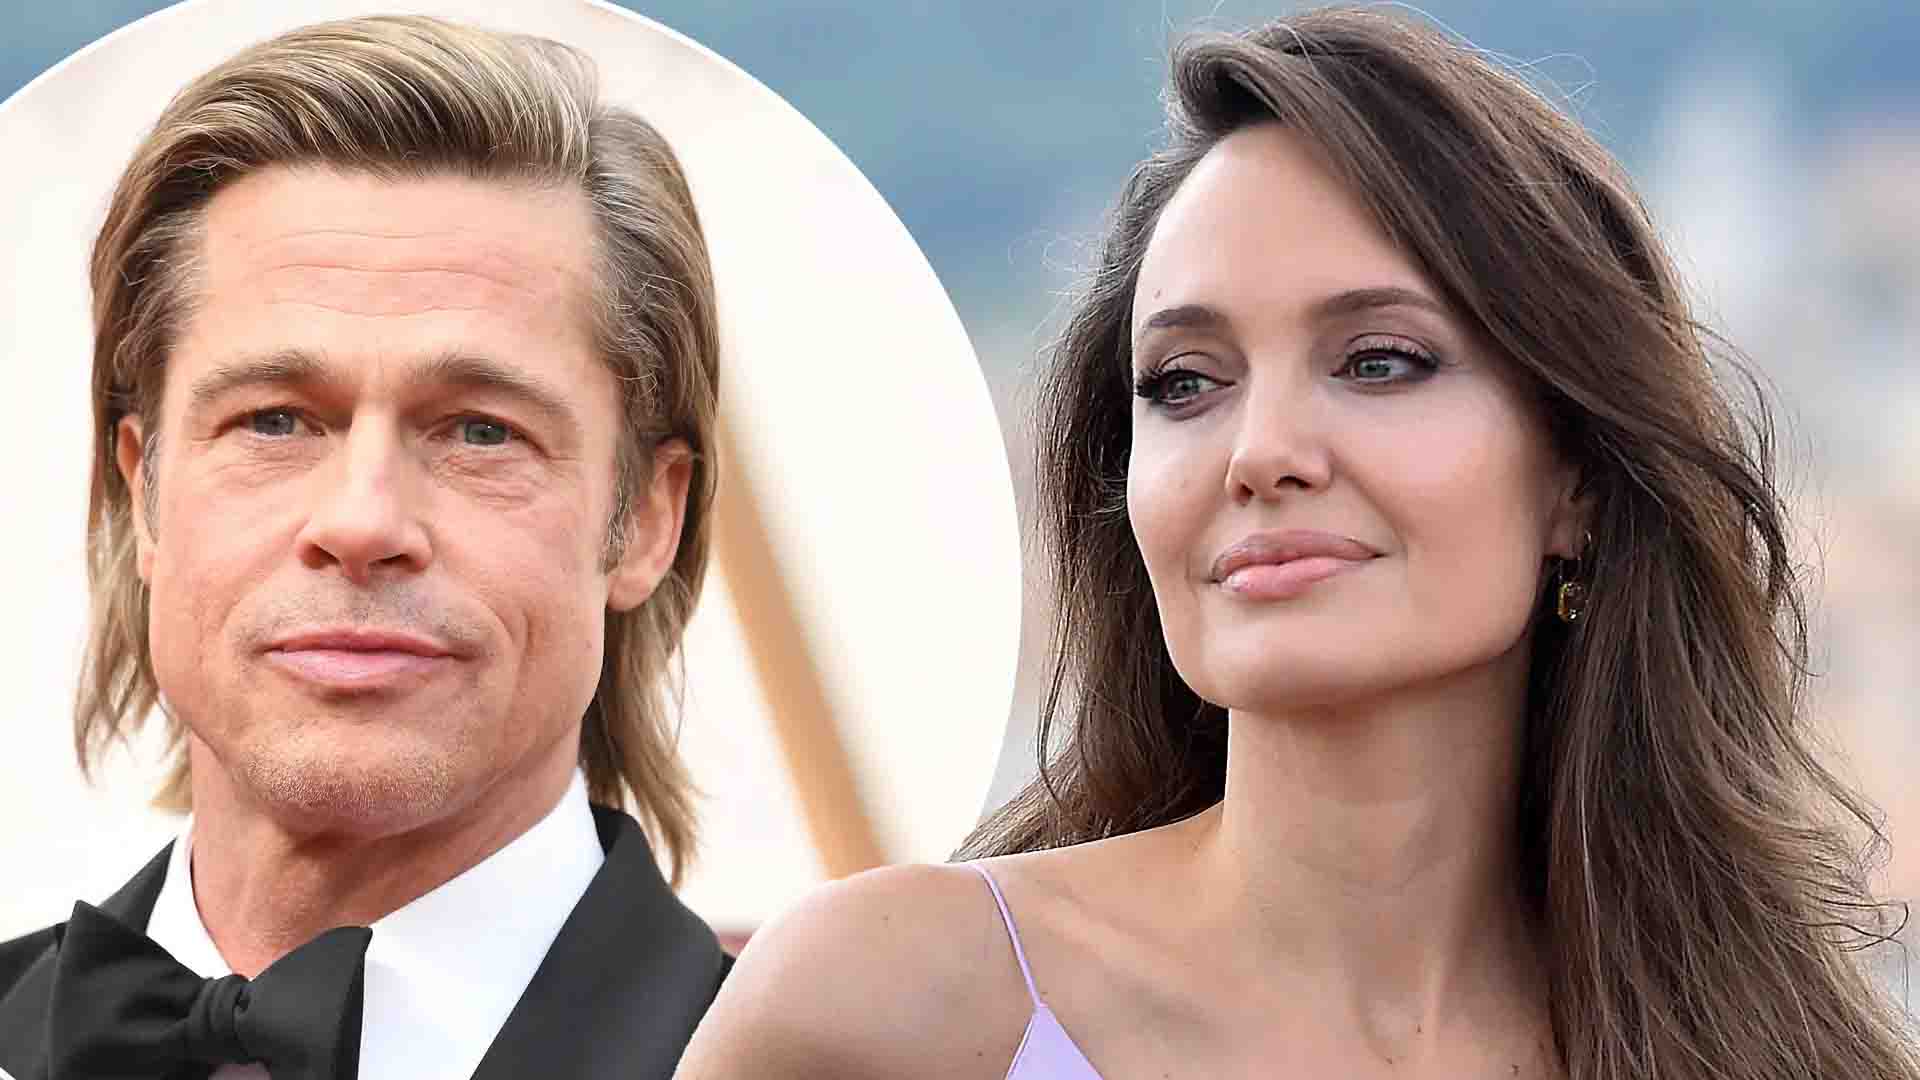 Brad Pitt Accused of Physical Abuse Amid Angelina Jolie Winery